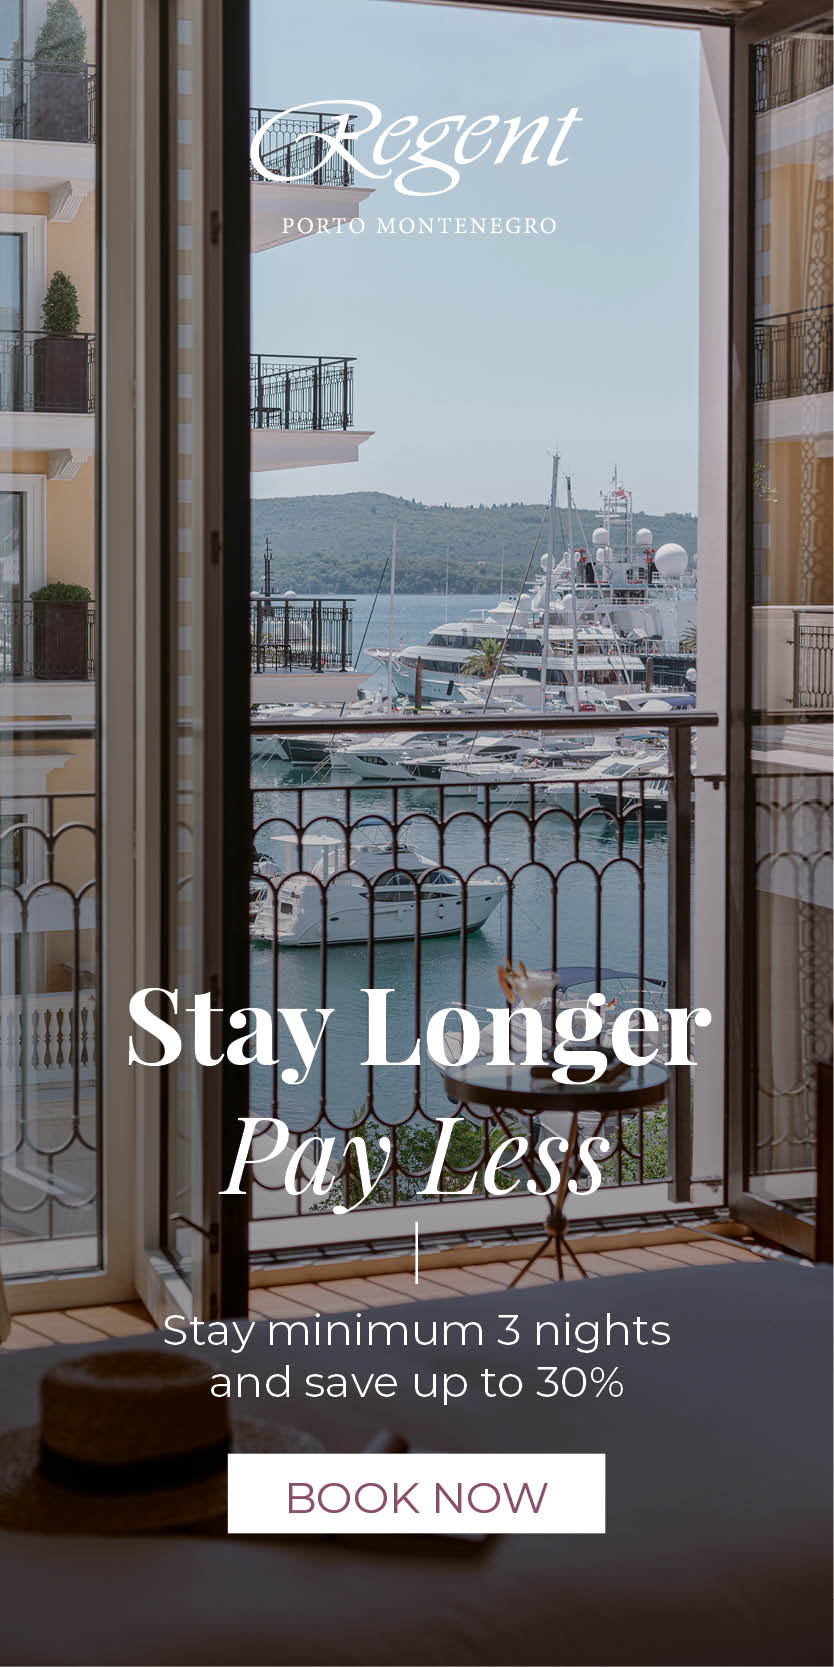 Stay long pay less